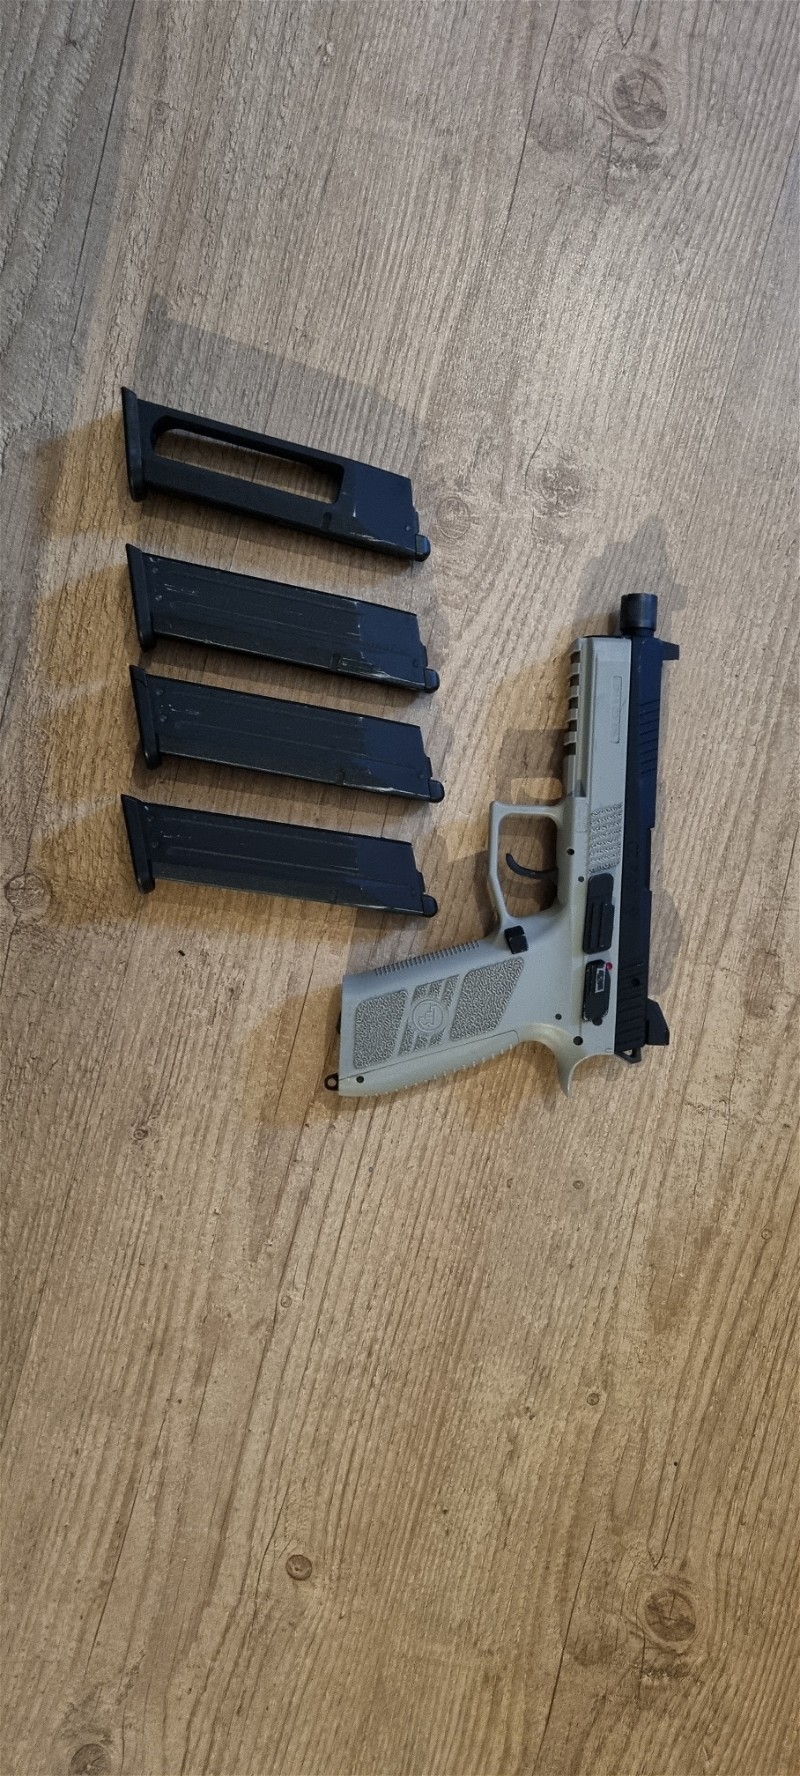 Image 1 for ASG CZ P-09 met 4 mags